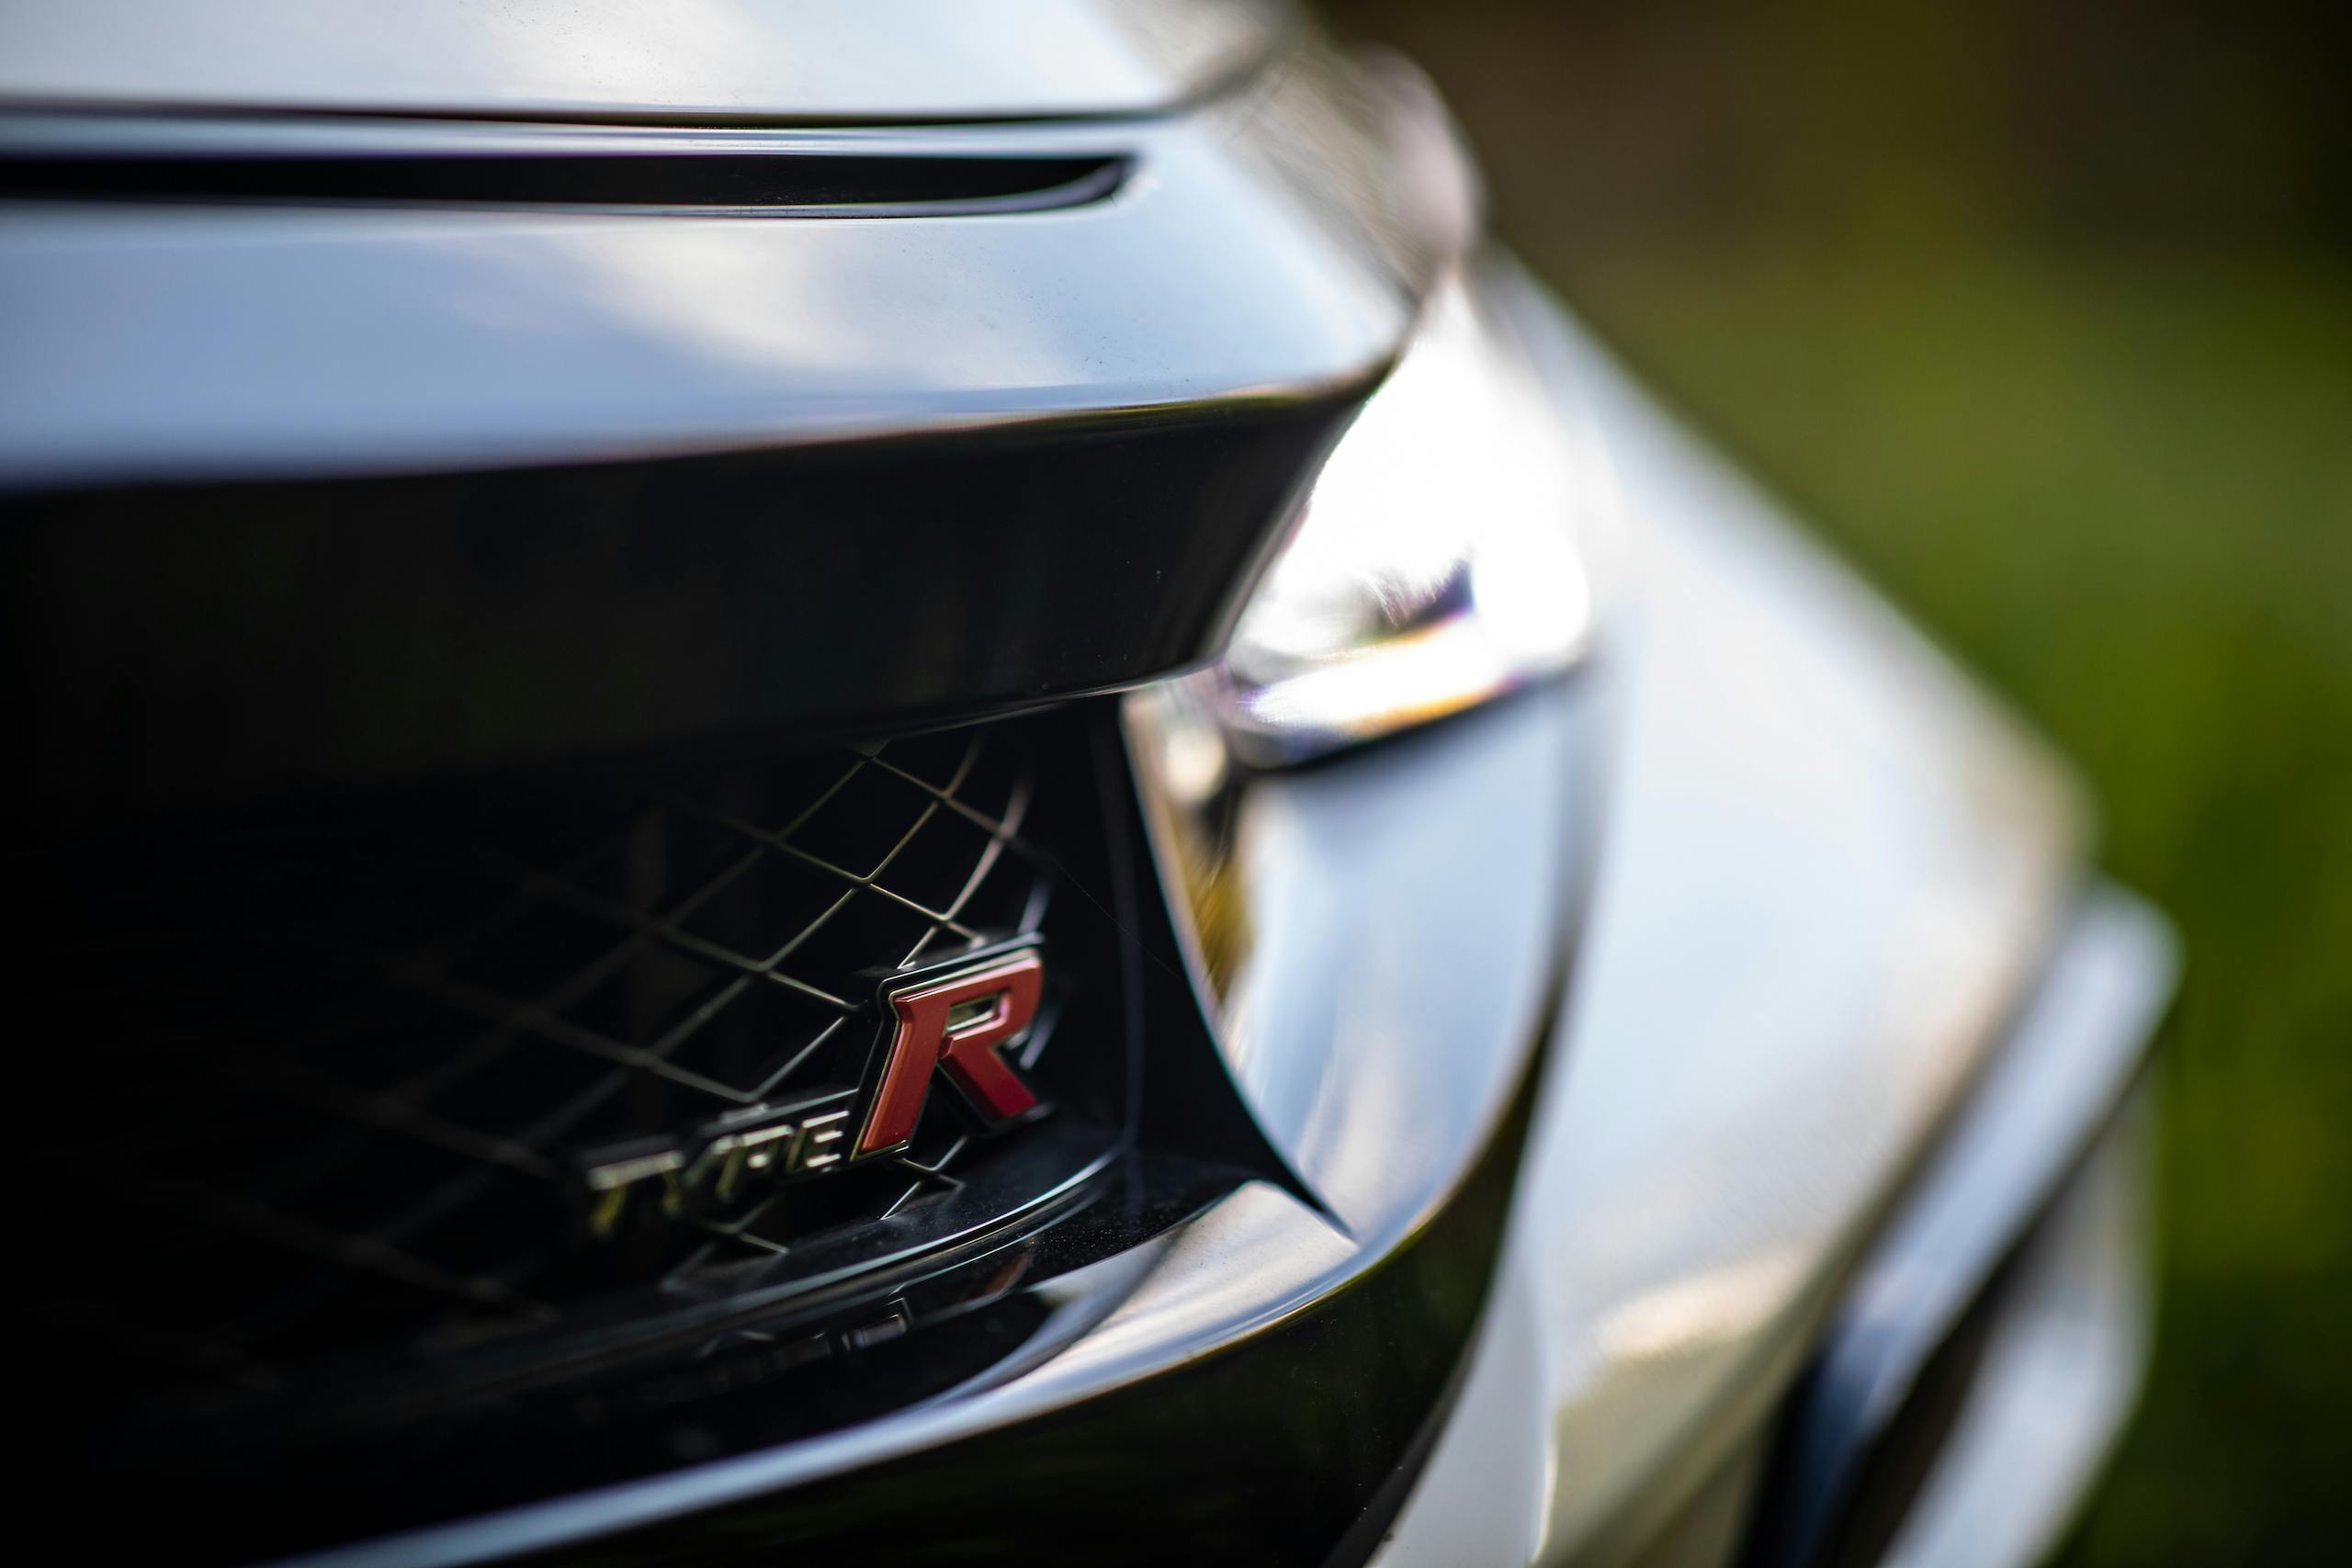 2020 Honda Civic Type R front grille detail